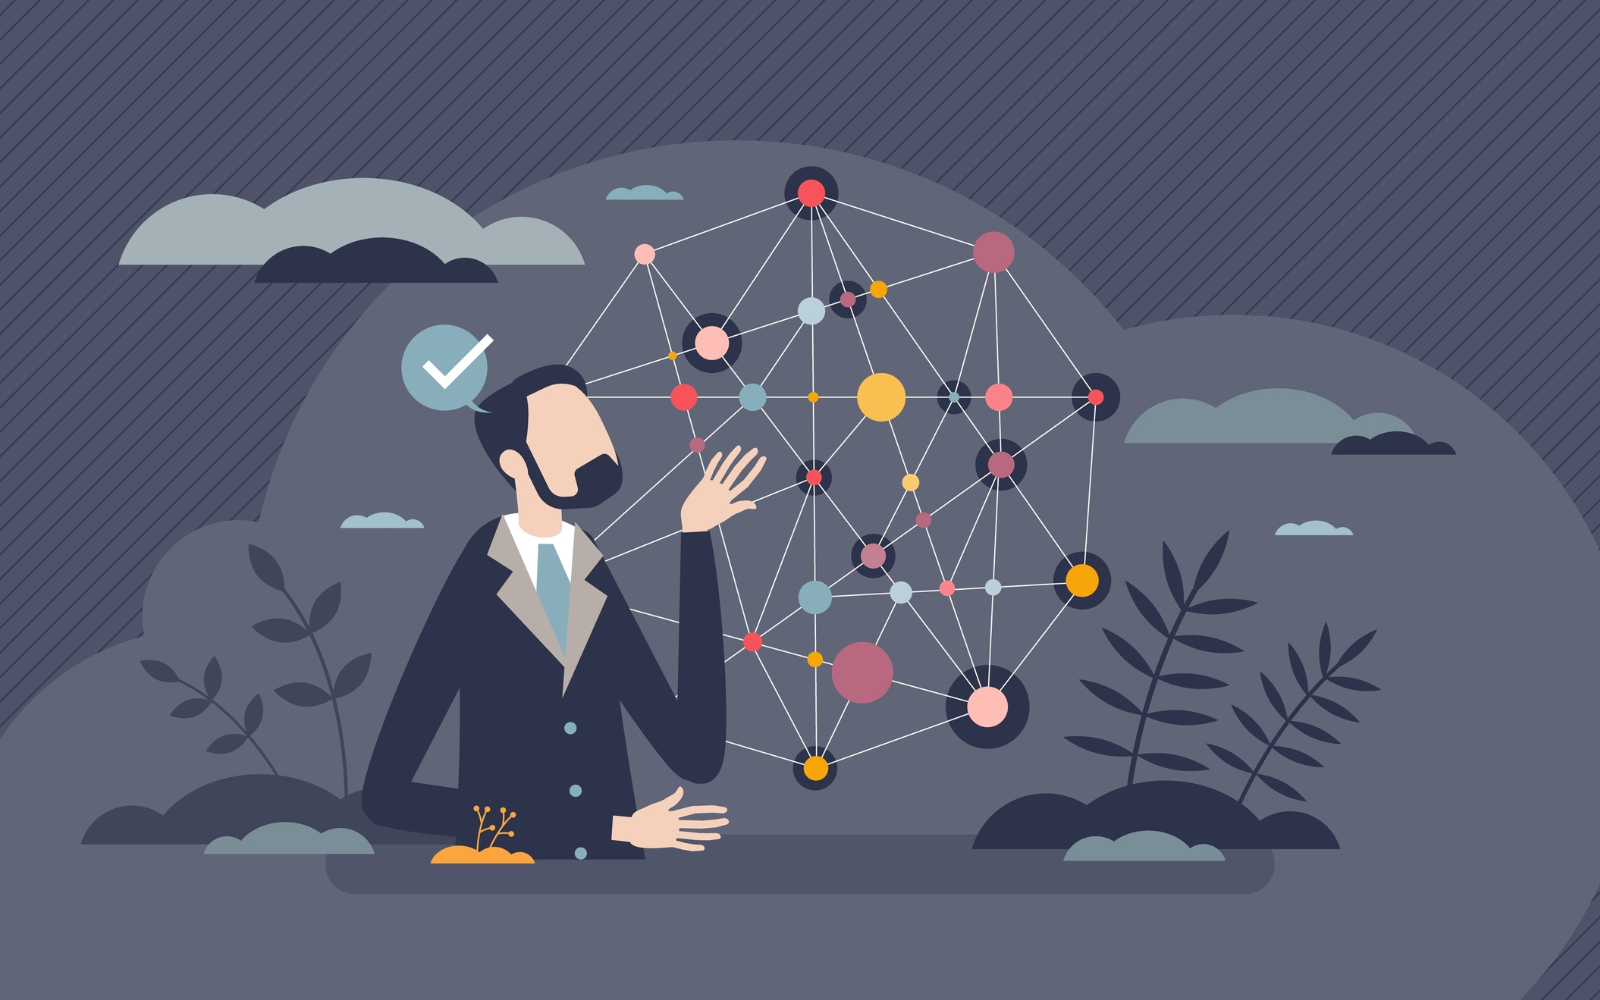 An illustration of a man in a business suit interacting with a floating 3D network of connected nodes, symbolizing SEO strategy and digital technology, set against a stylized outdoor background with clouds and plants